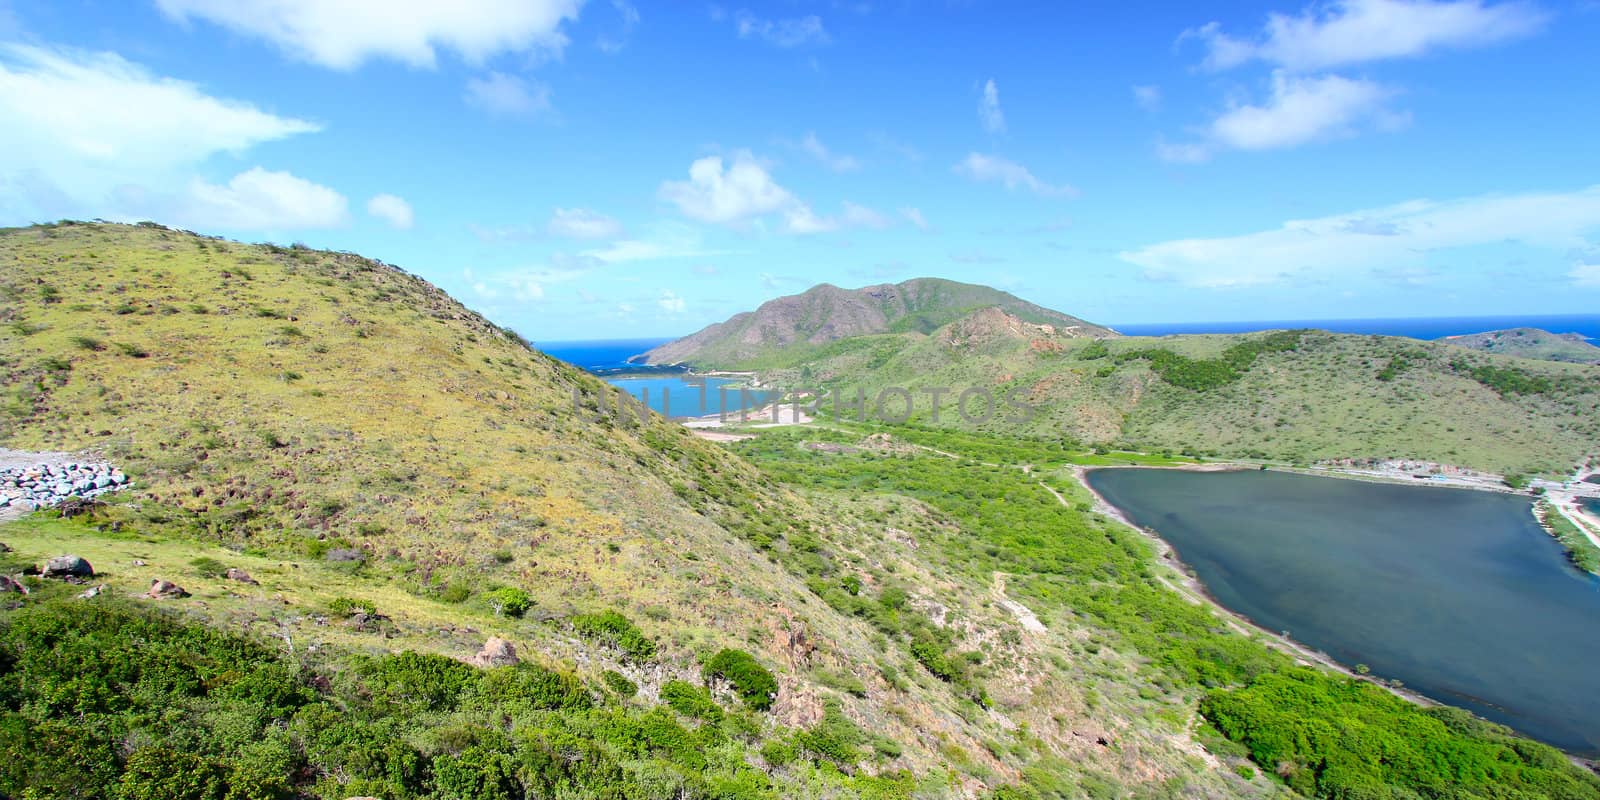 View of the Caribbean island of Saint Kitts.